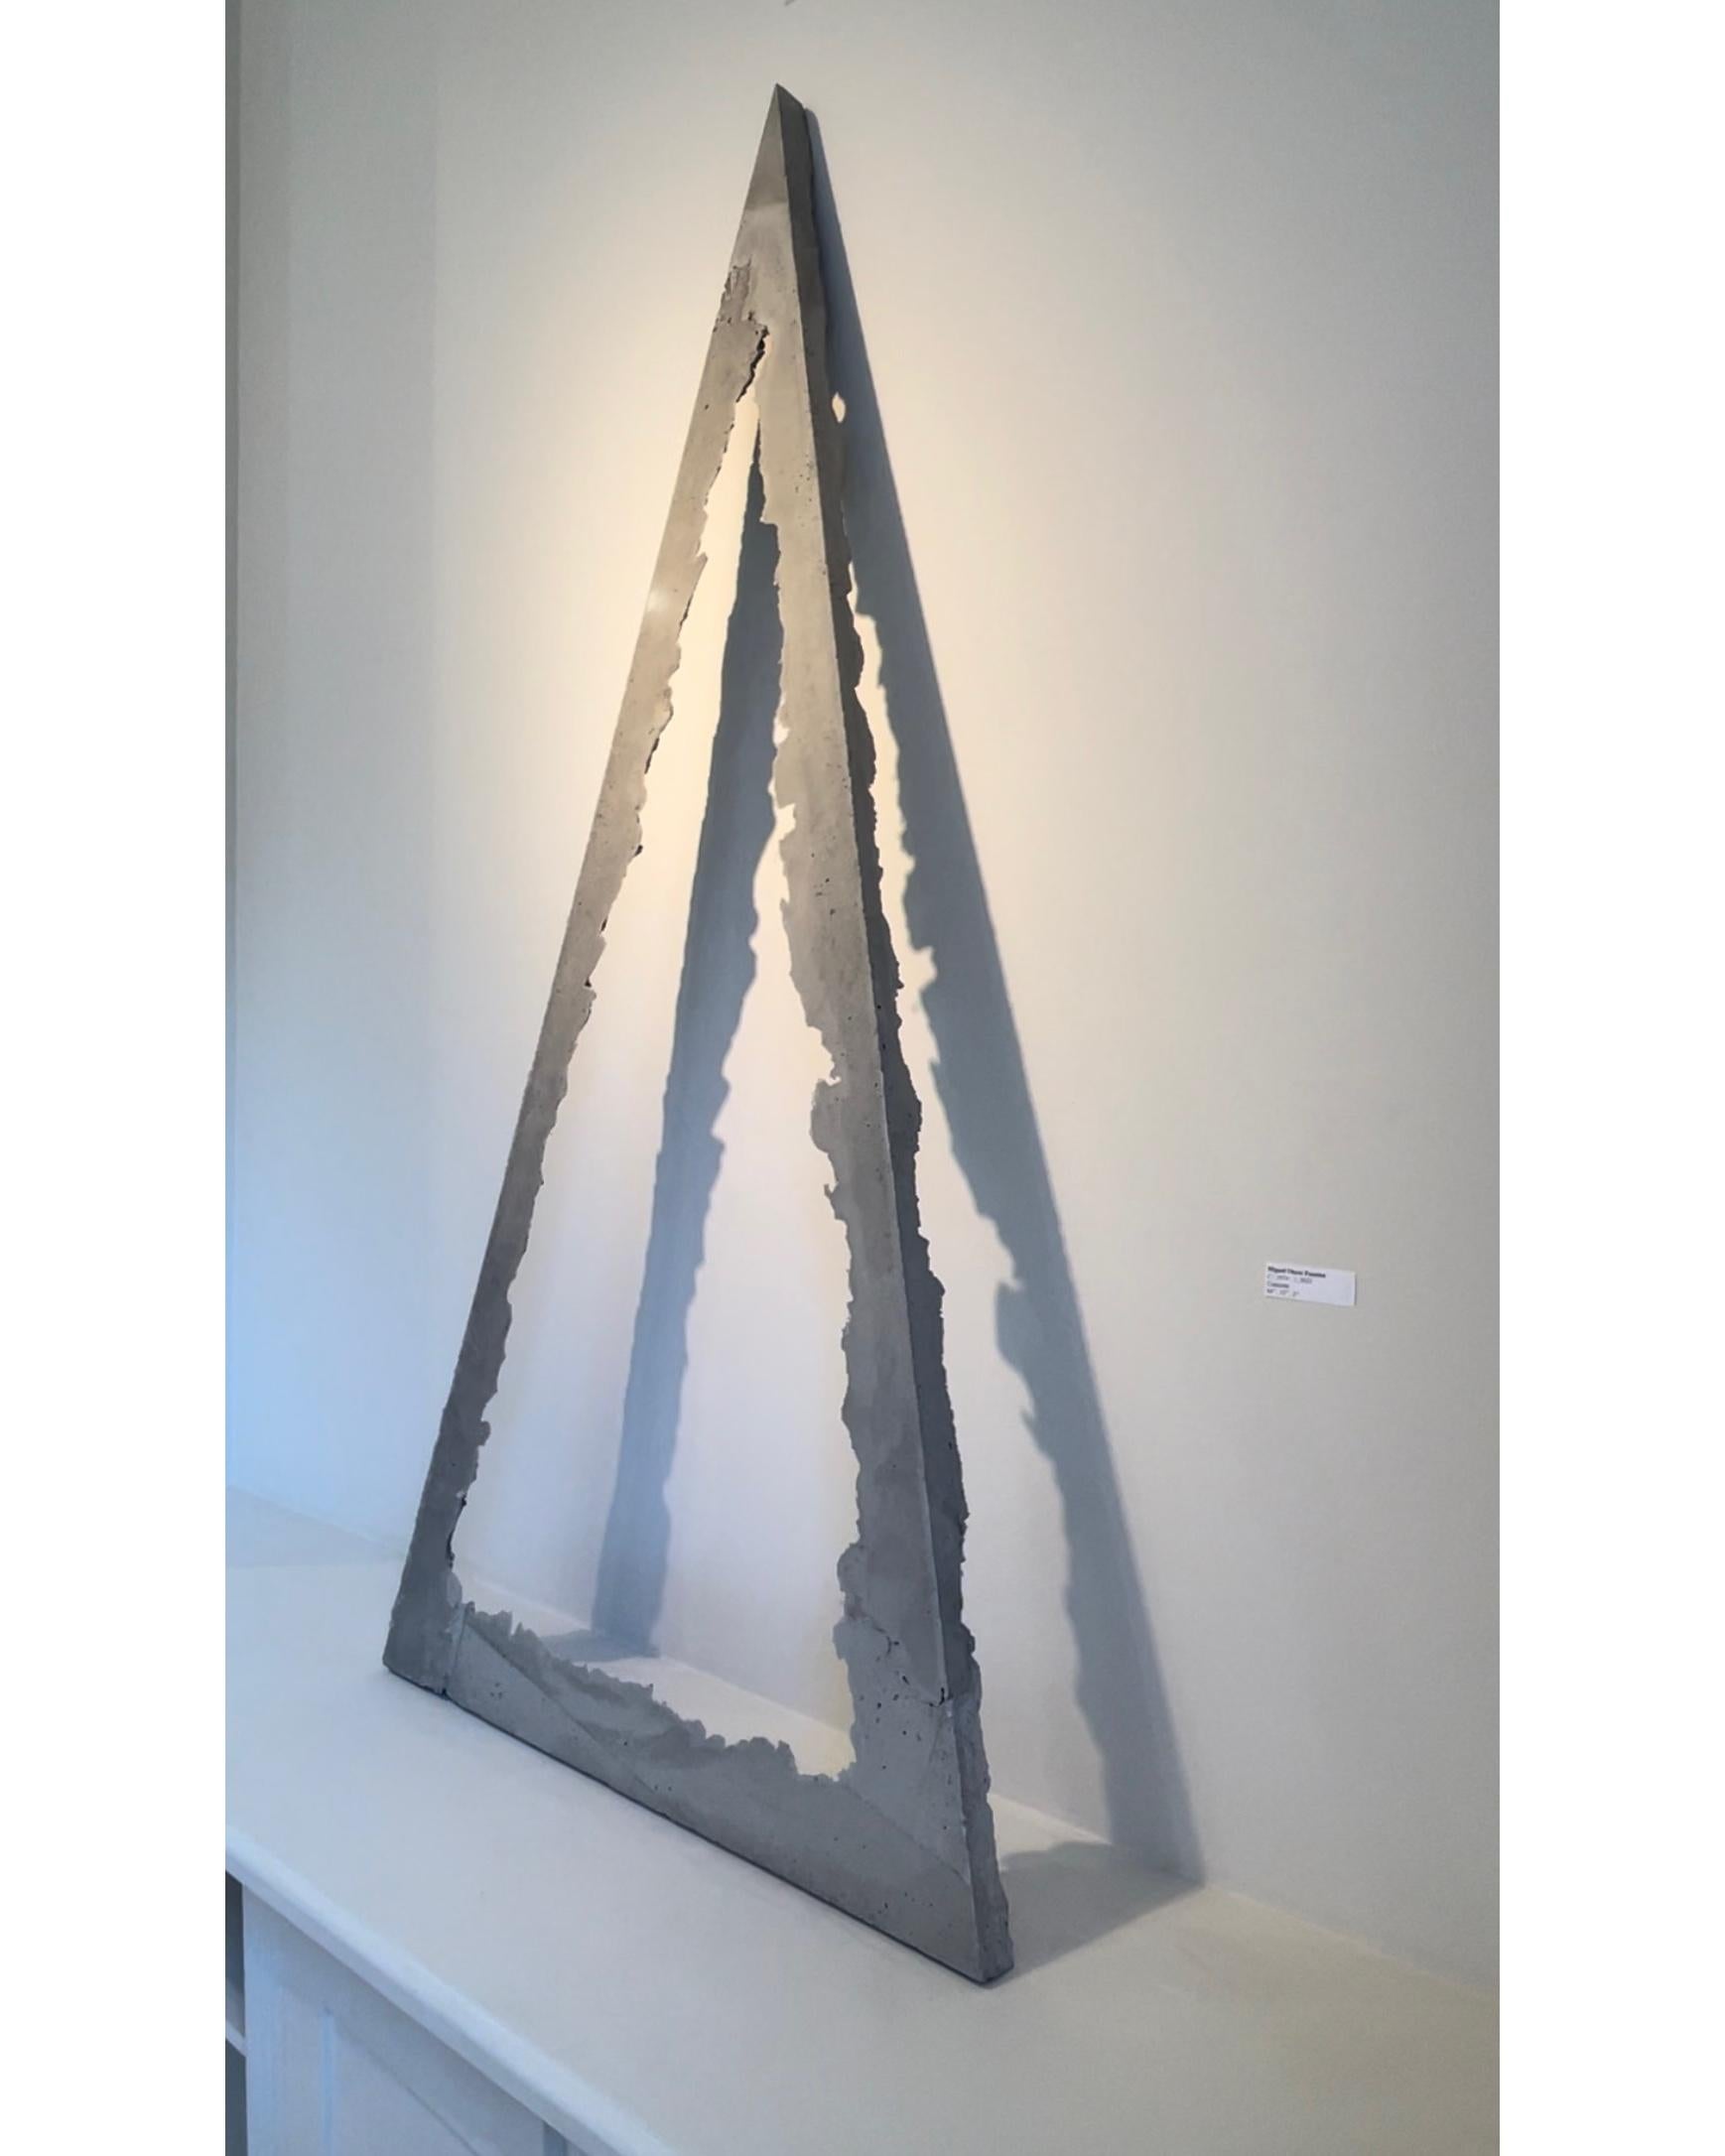 Contemporary Abstract Triangular Sculpture 

C /1024\ 1
64”, 32”, 2” :: CONCRETE :: 2022

About The Artist
Miguel A Otero Fuentes is a Puerto Rico-born USA migrant, a university trained architect specializing in facade design, and a self-taught